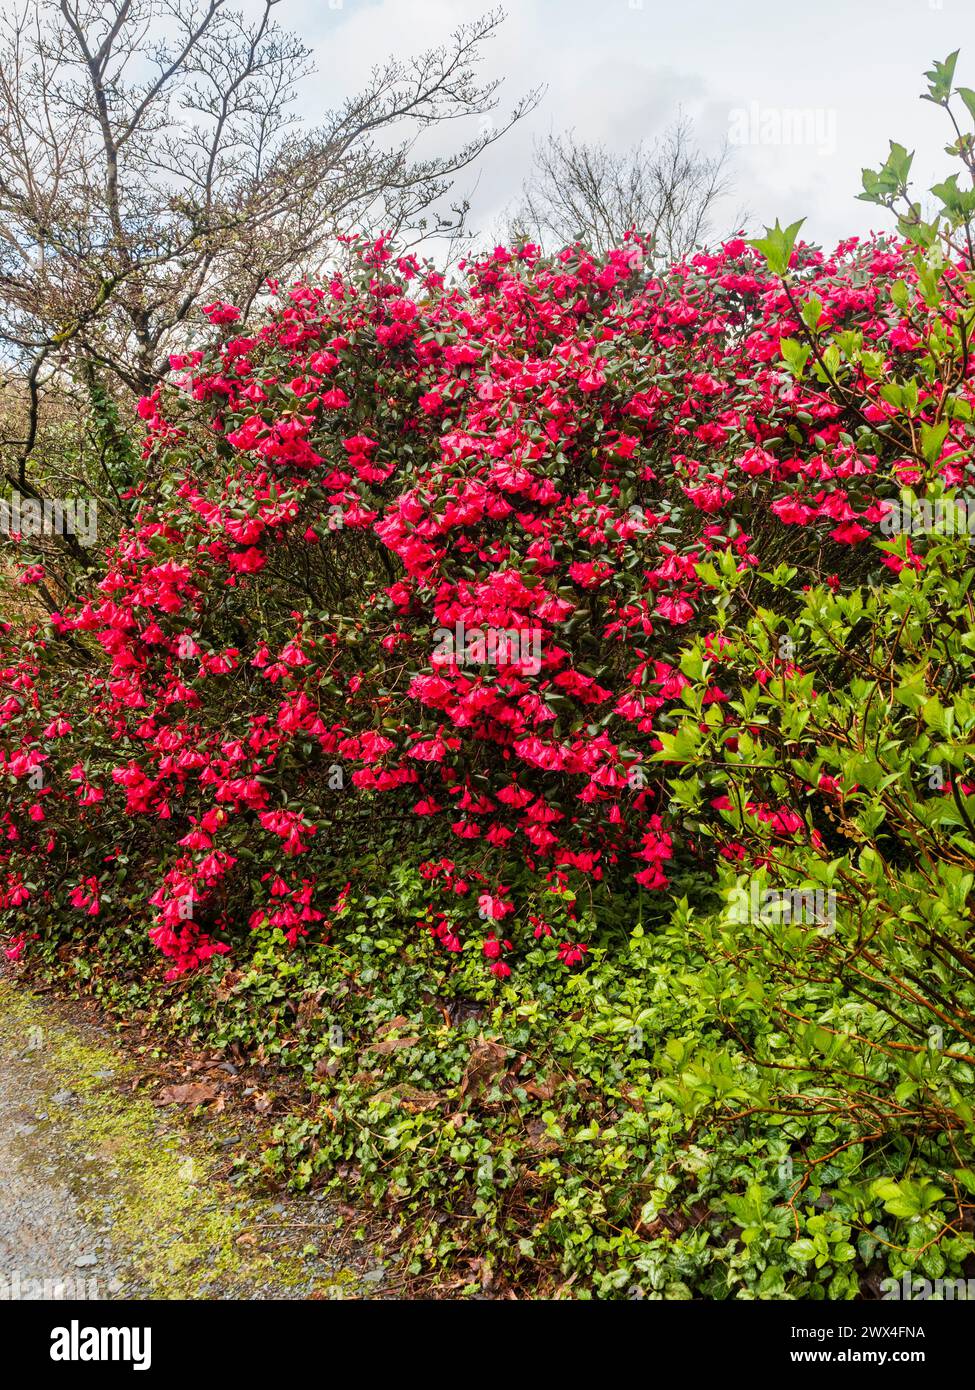 Deep pink flowers of the hardy evergreen shrub, Rhododendron orbiculare at The Garden House, Devon, UK Stock Photo